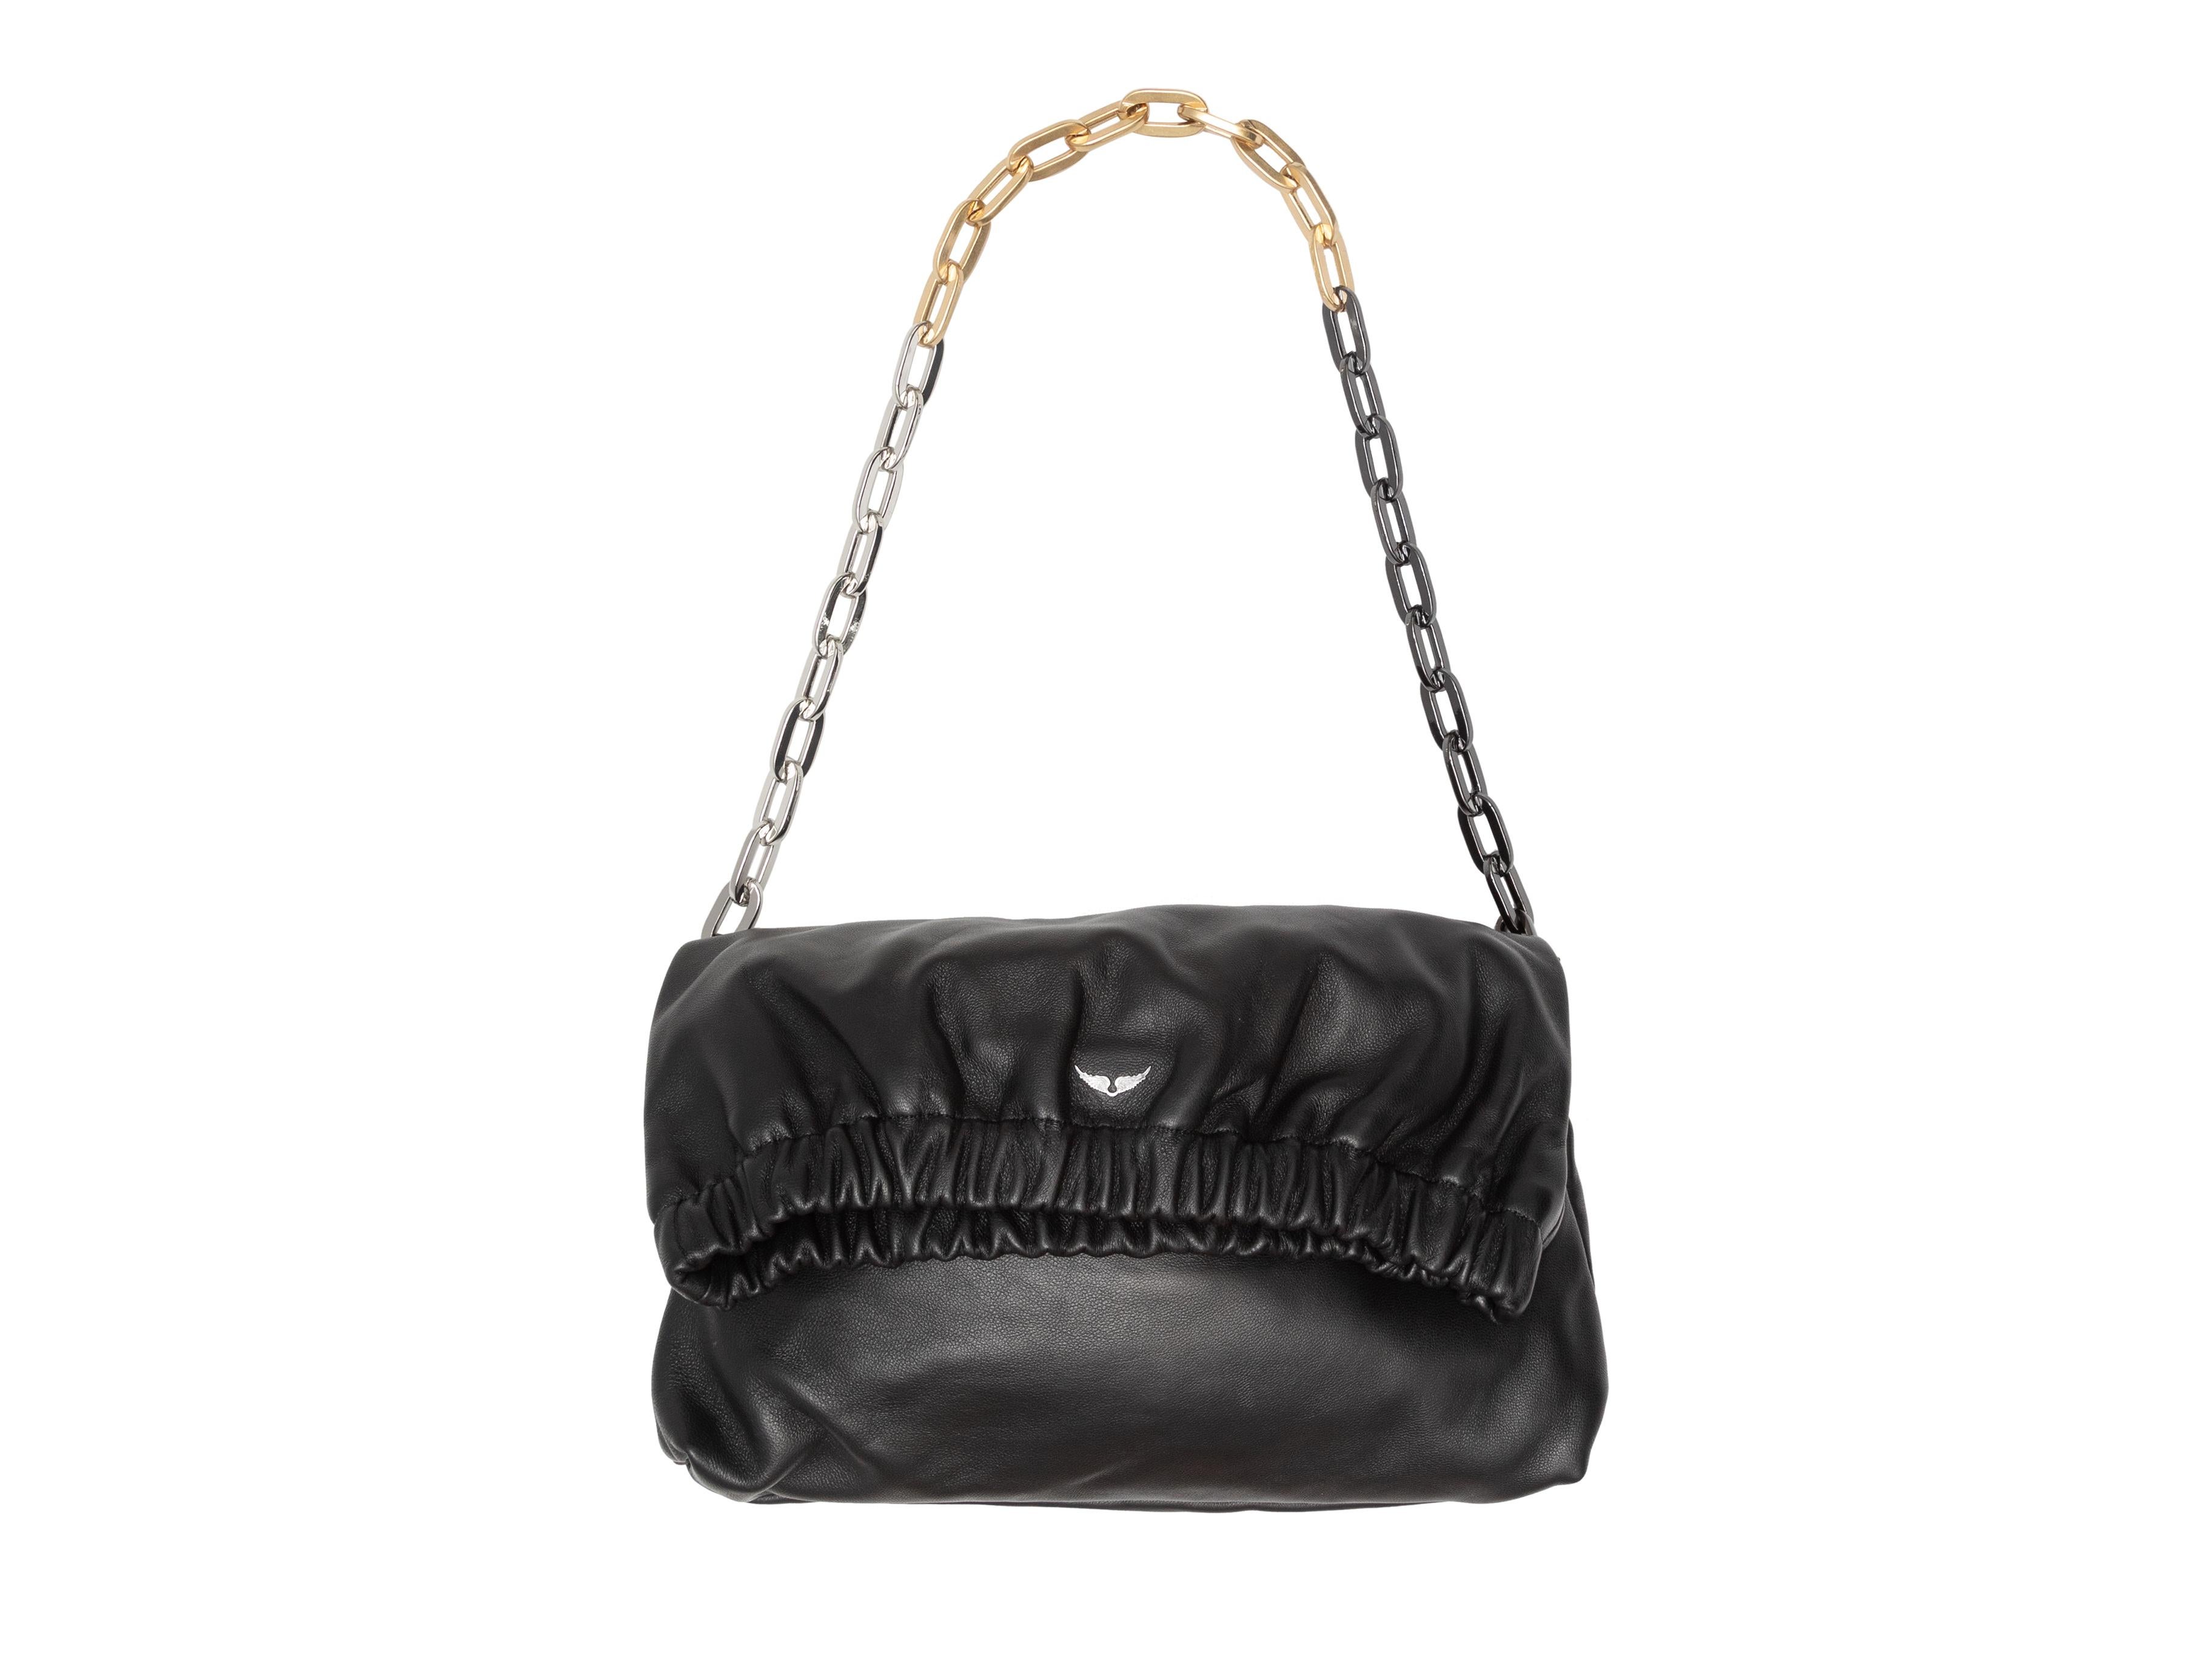 Black Zadig & Voltaire Rockyssime Shoulder Bag. The Rockyssime bag features a leather body, silver-tone hardware, multiple strap options, and a foldover top. 12